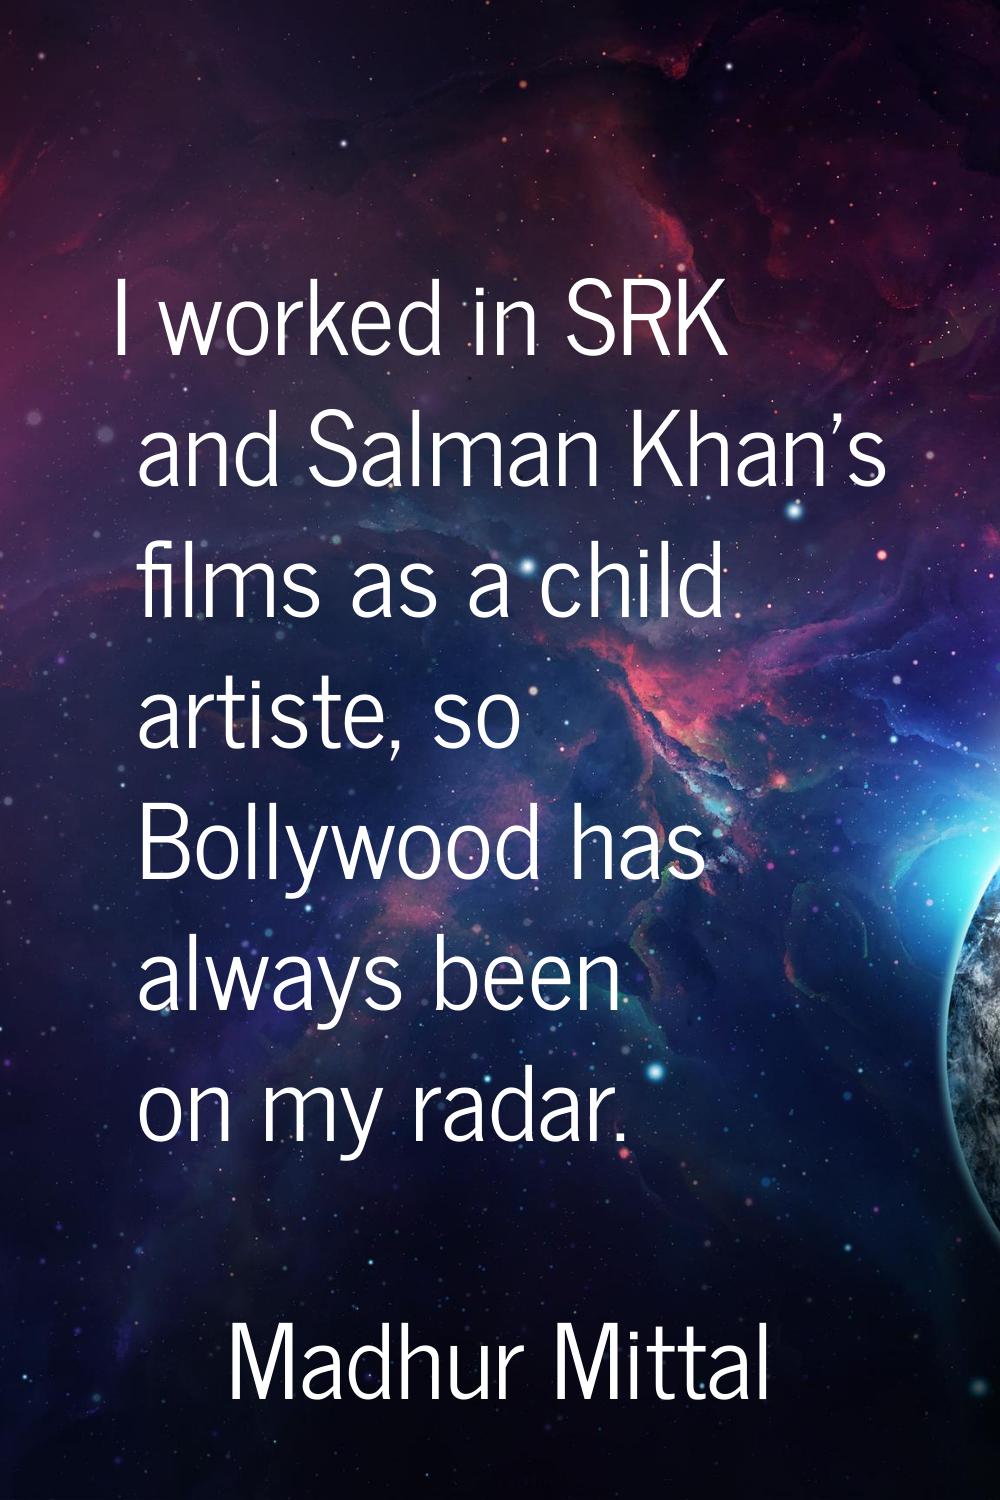 I worked in SRK and Salman Khan's films as a child artiste, so Bollywood has always been on my rada